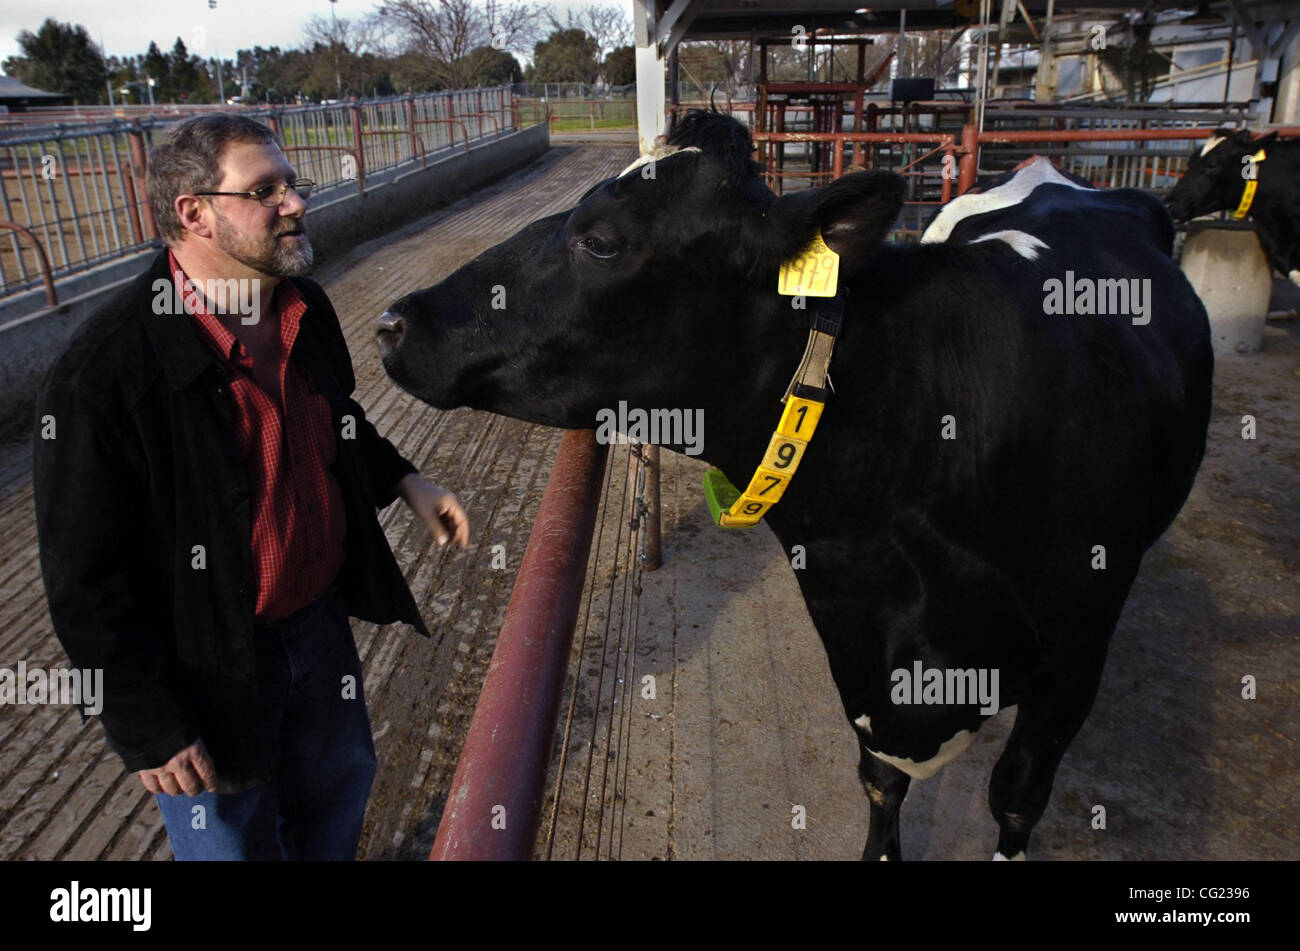 Prof. James Murray <cq> is entertained by 'Dot,' one of two cloned Holstein cows (the other is 'Ditto') at the UC Davis dairy barn.  Both cows are treated as research animals as so they have become quite friendly around people.  Wednesday, January 3, 2007.  Sacramento Bee/  Jay Mather Stock Photo